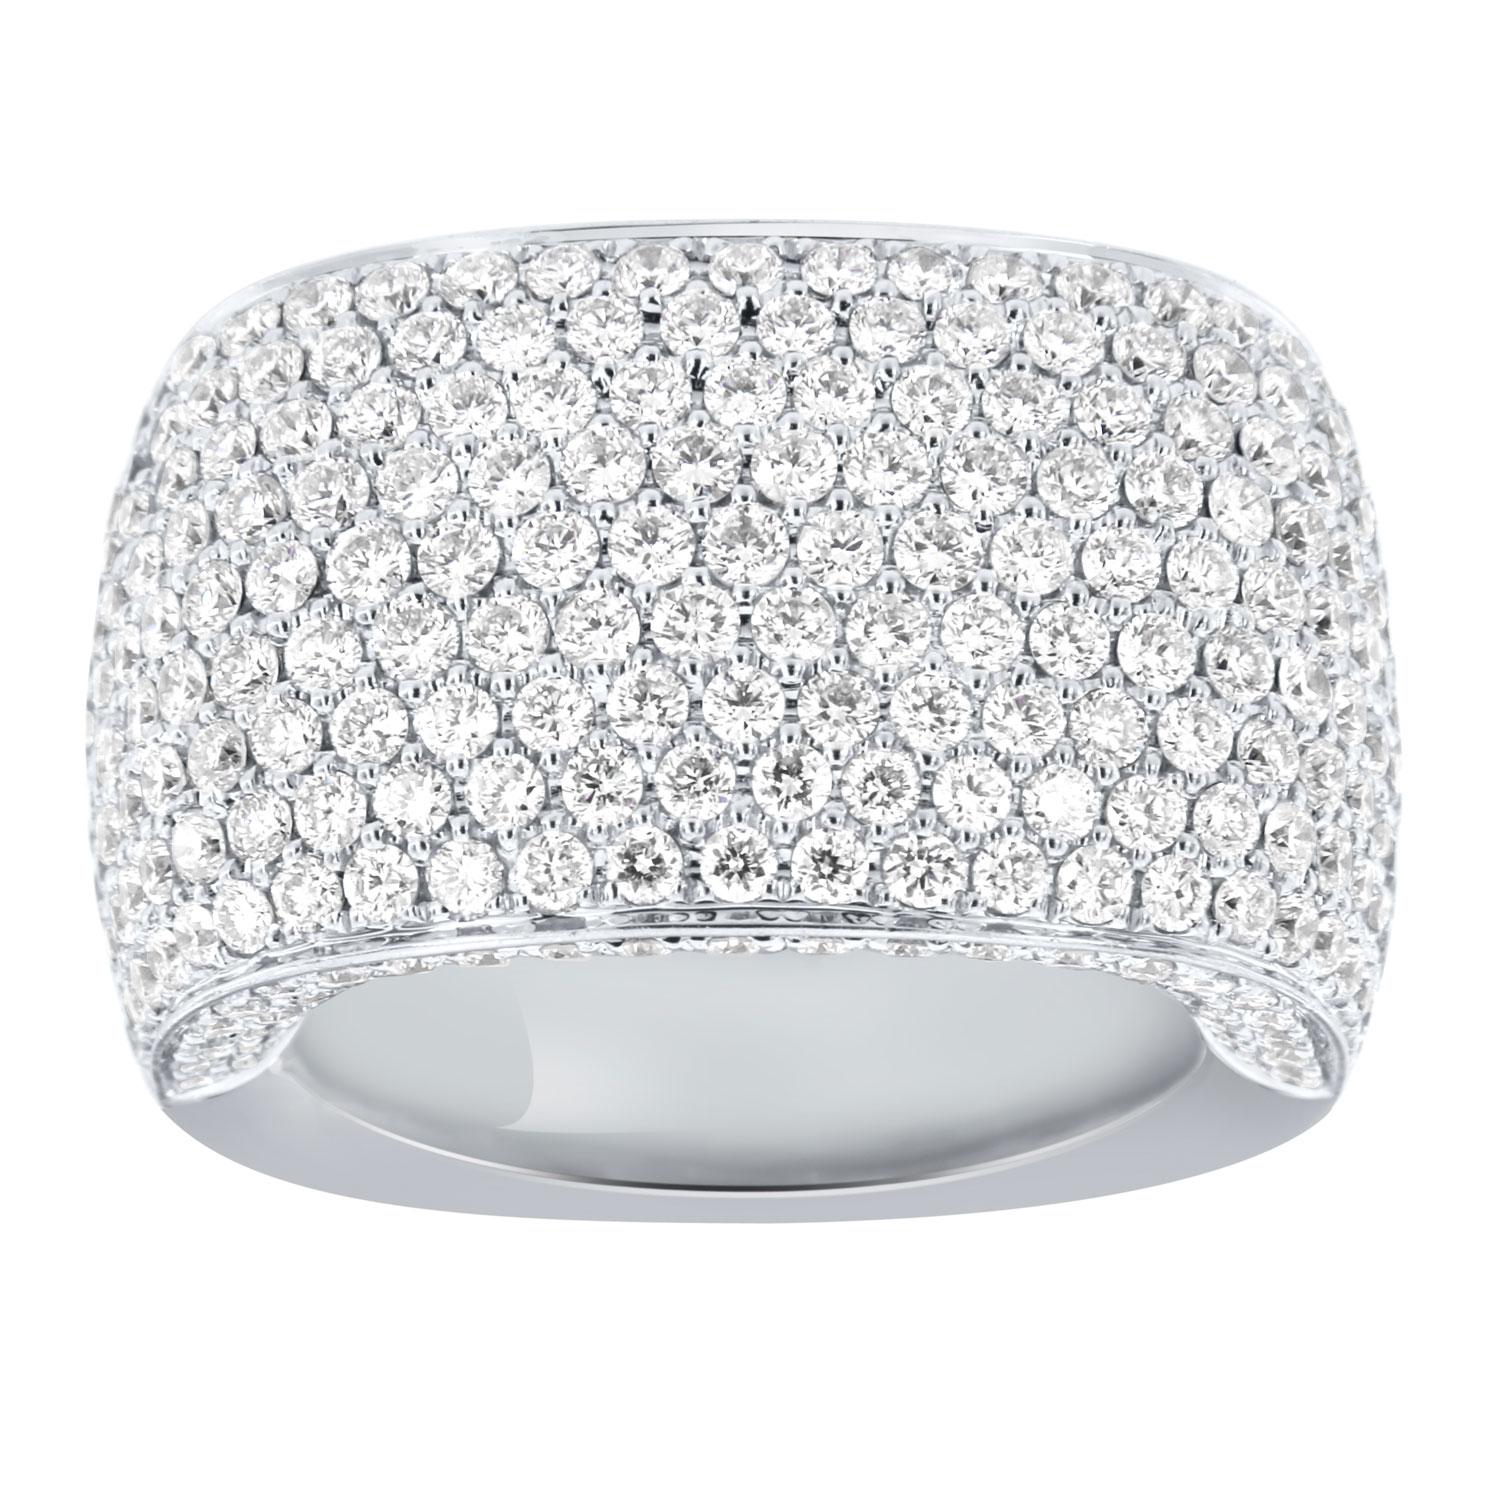 18K White Gold 4.20 Carat Total Weight Diamond Ring For Sale